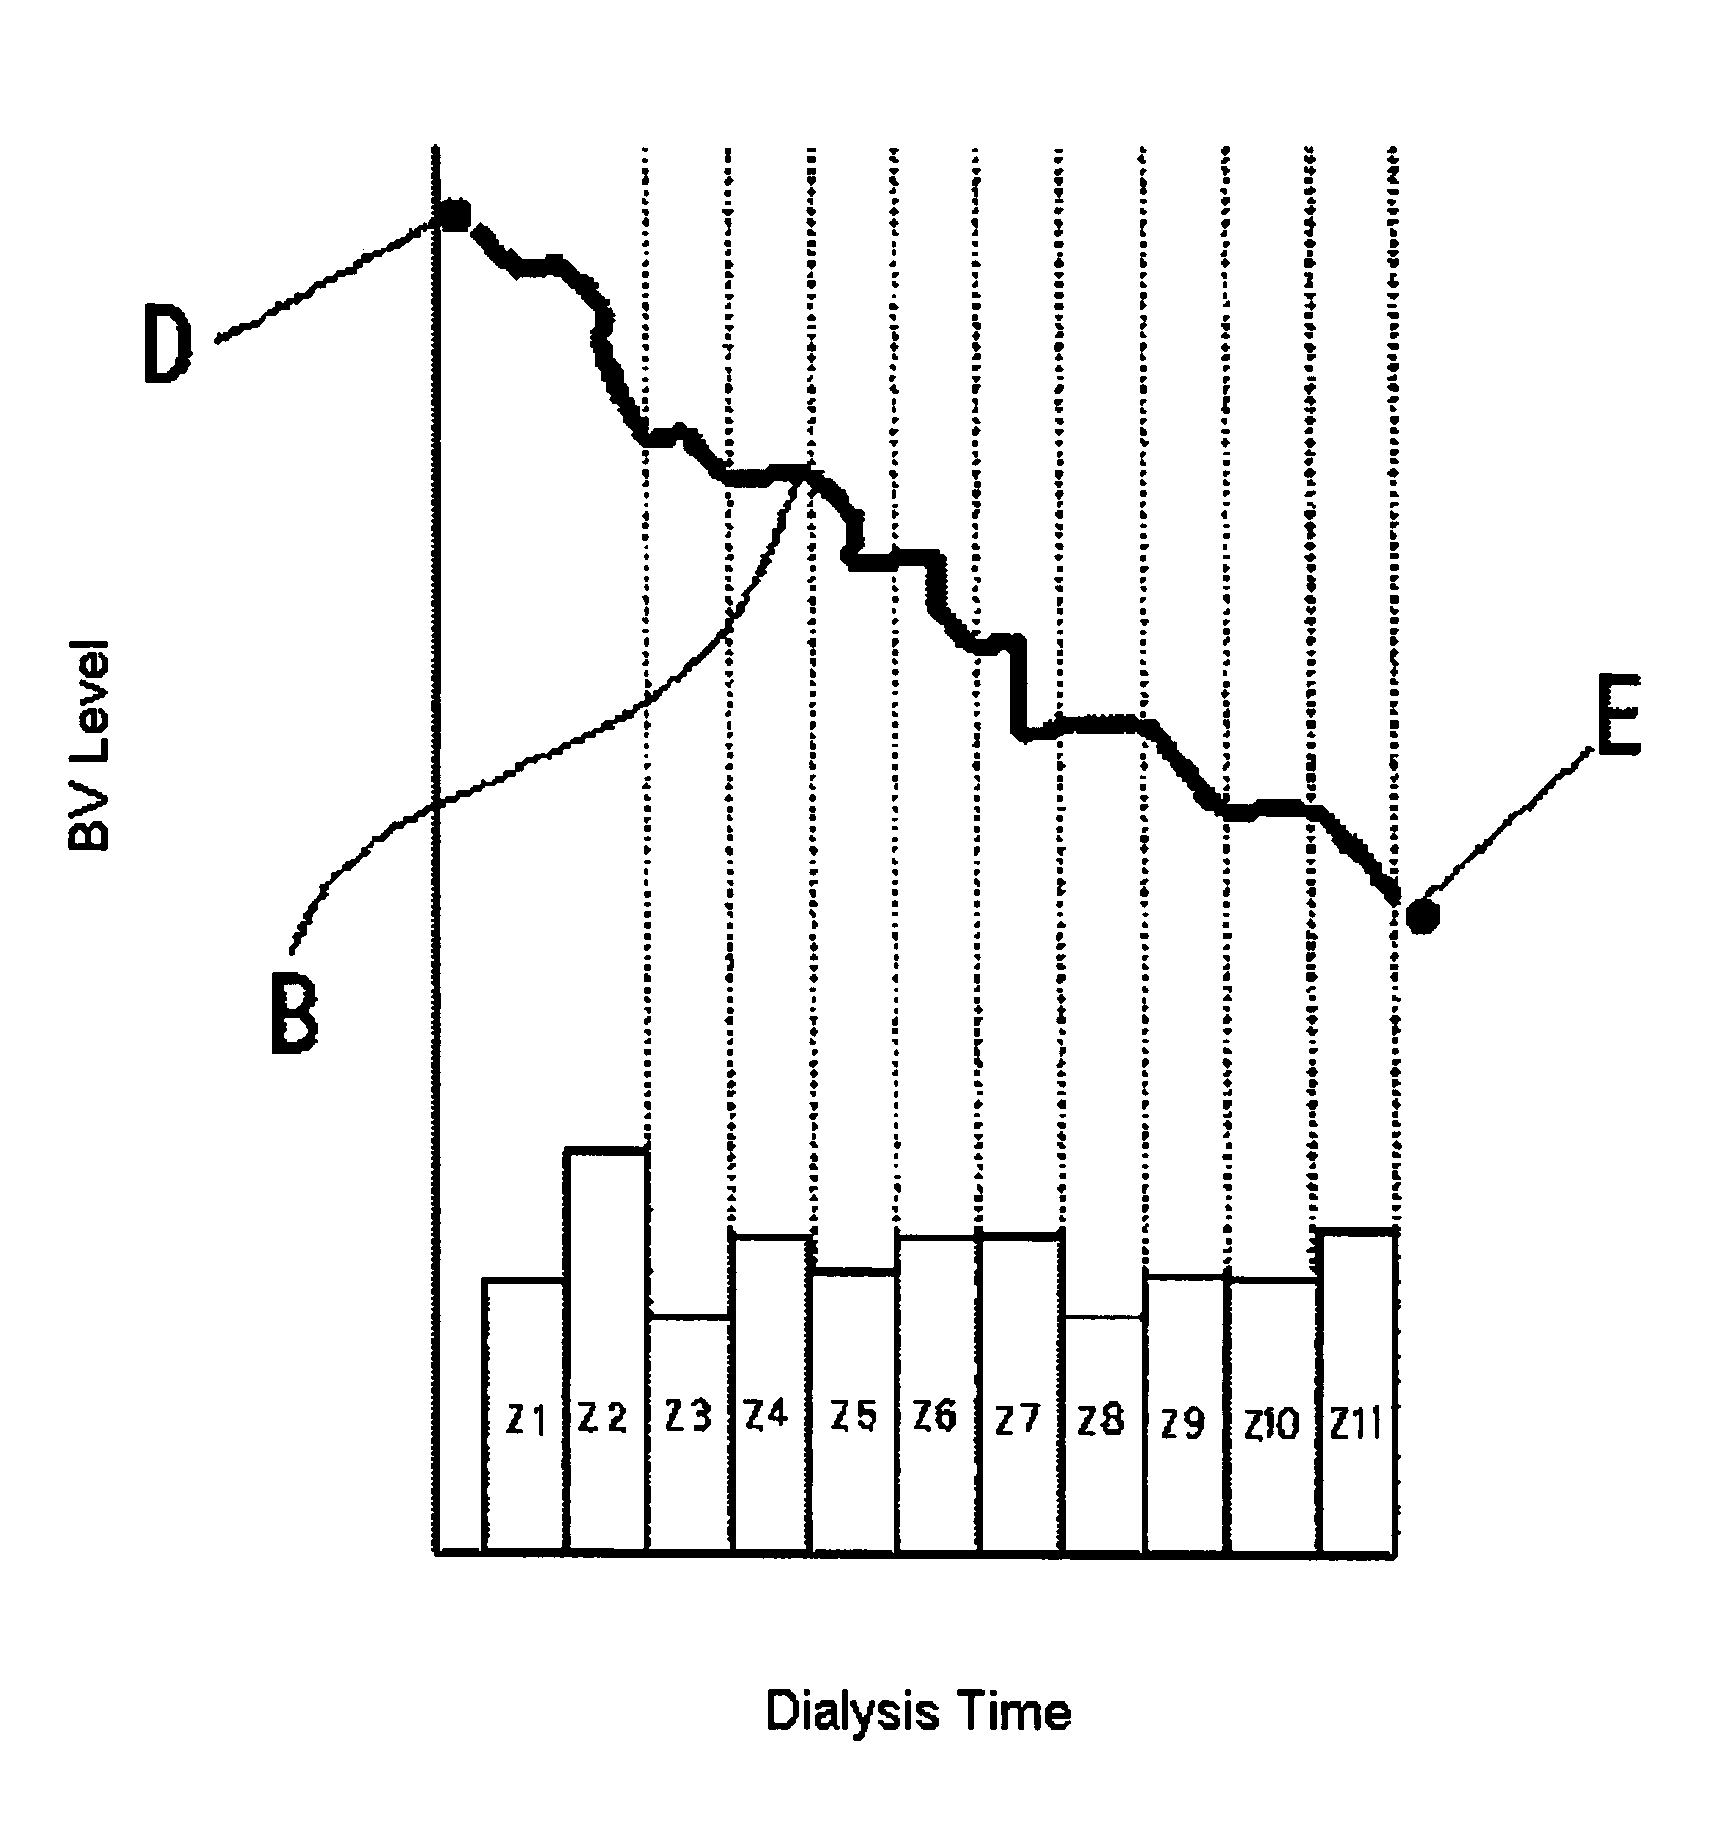 Blood purification apparatus for elevating purification efficiency